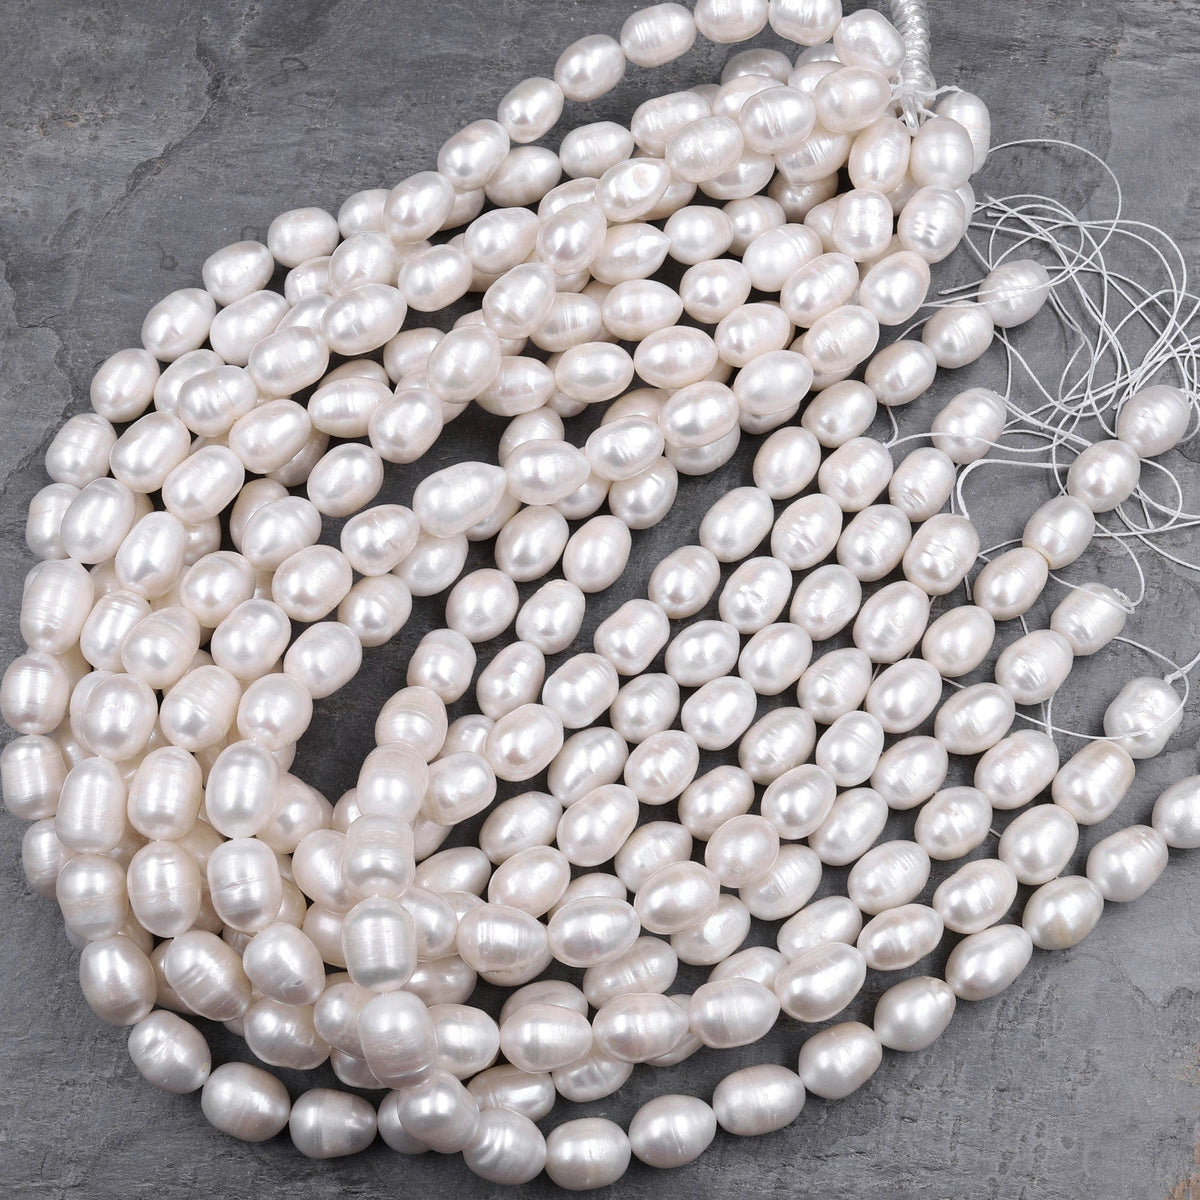 Gorgeous Oval Near Round White Freshwater Pearl Beads with Small